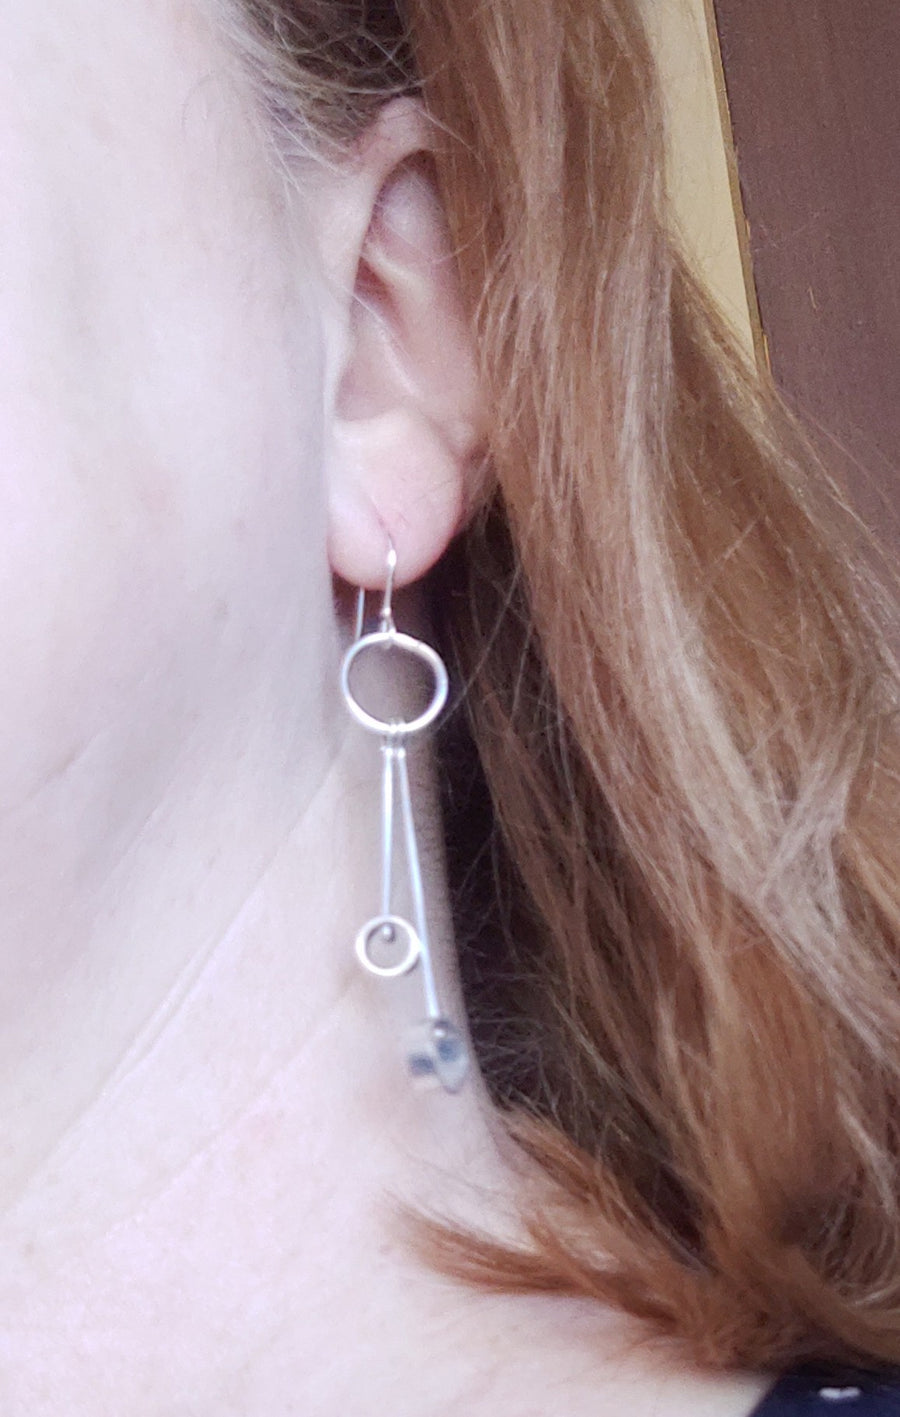 Minimalism Earrings - Hoops with Double Cylinder Dangles - V26 - MARTINIJewels